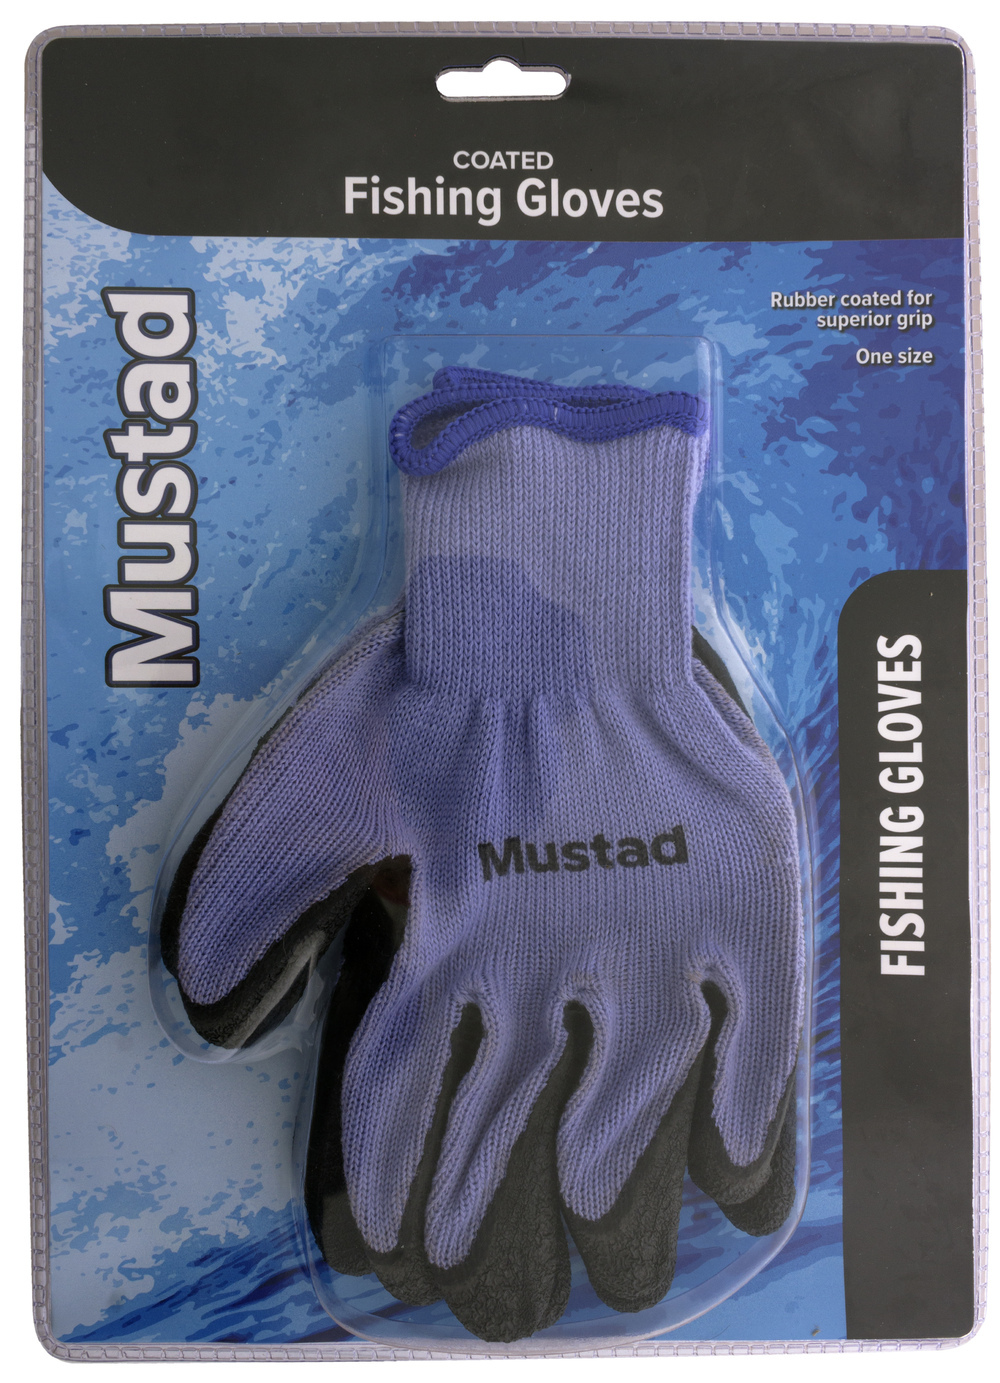 Mustad Rubber Coated Fishing Gloves